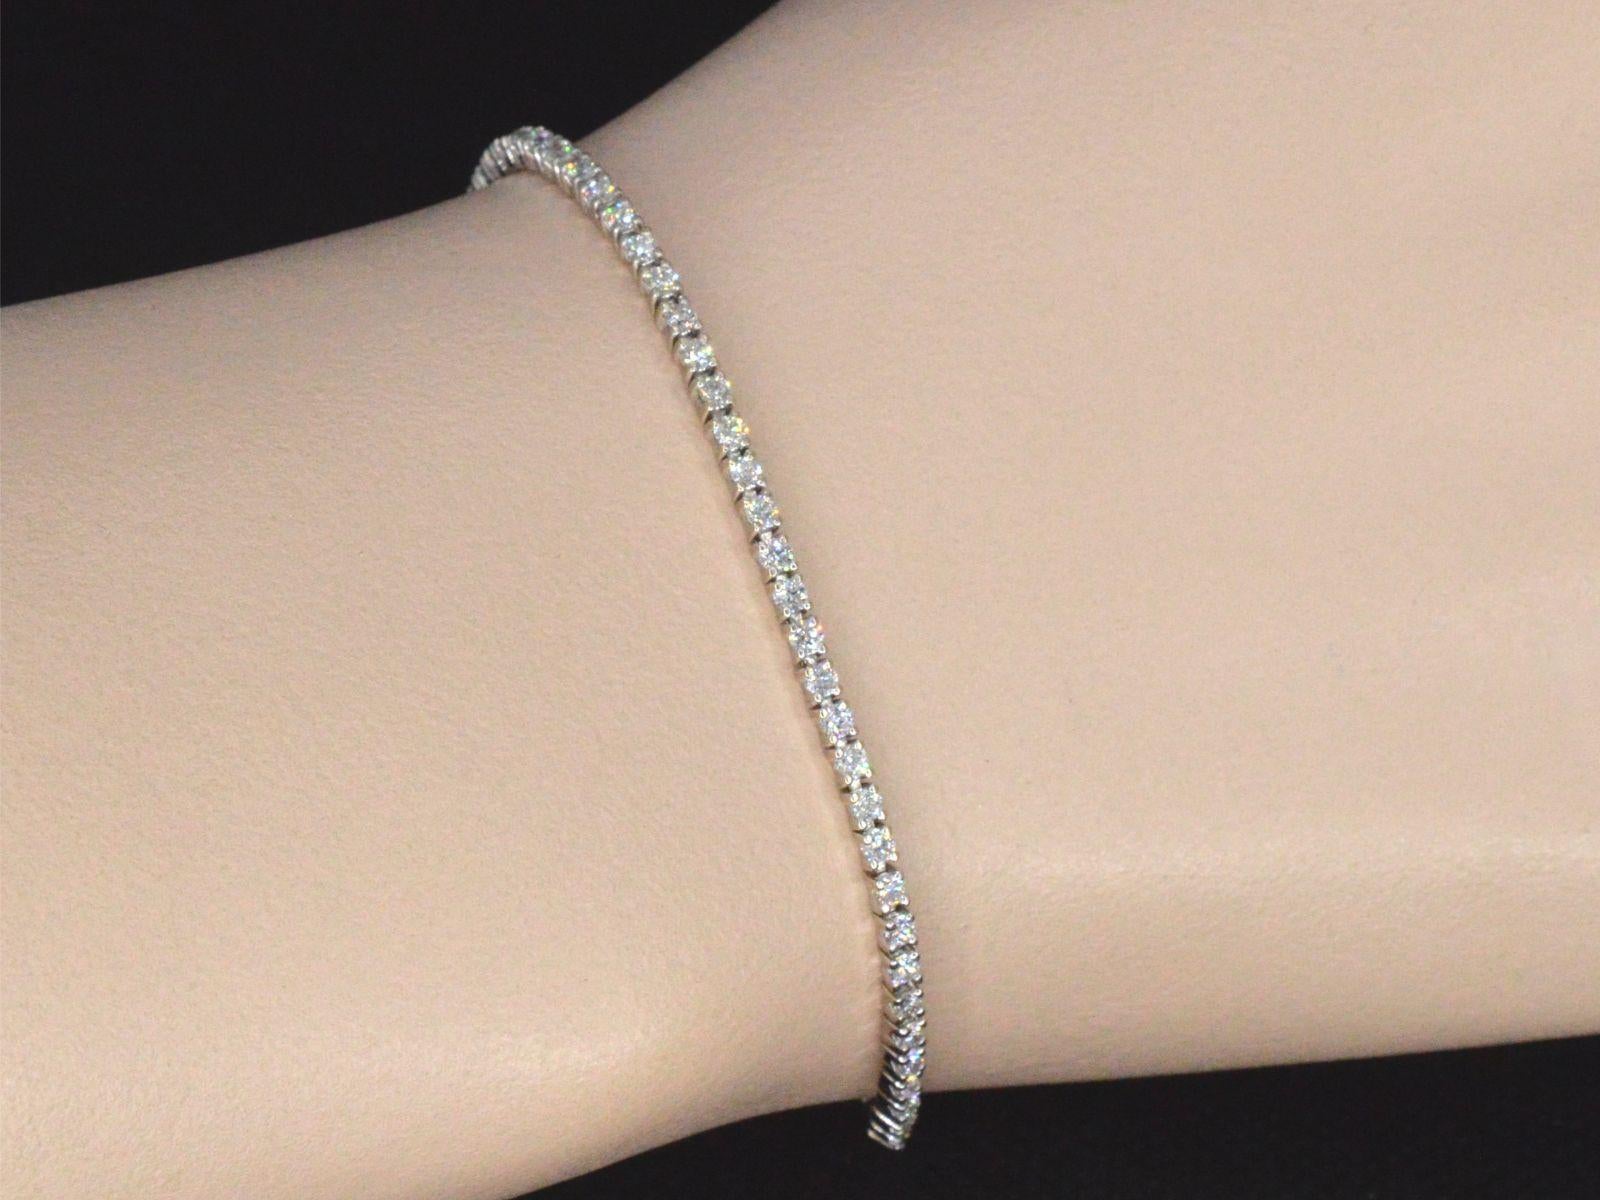 Exquisite Mauboussin white gold tennis bracelet adorned with dazzling diamonds. This stunning bracelet, known as 